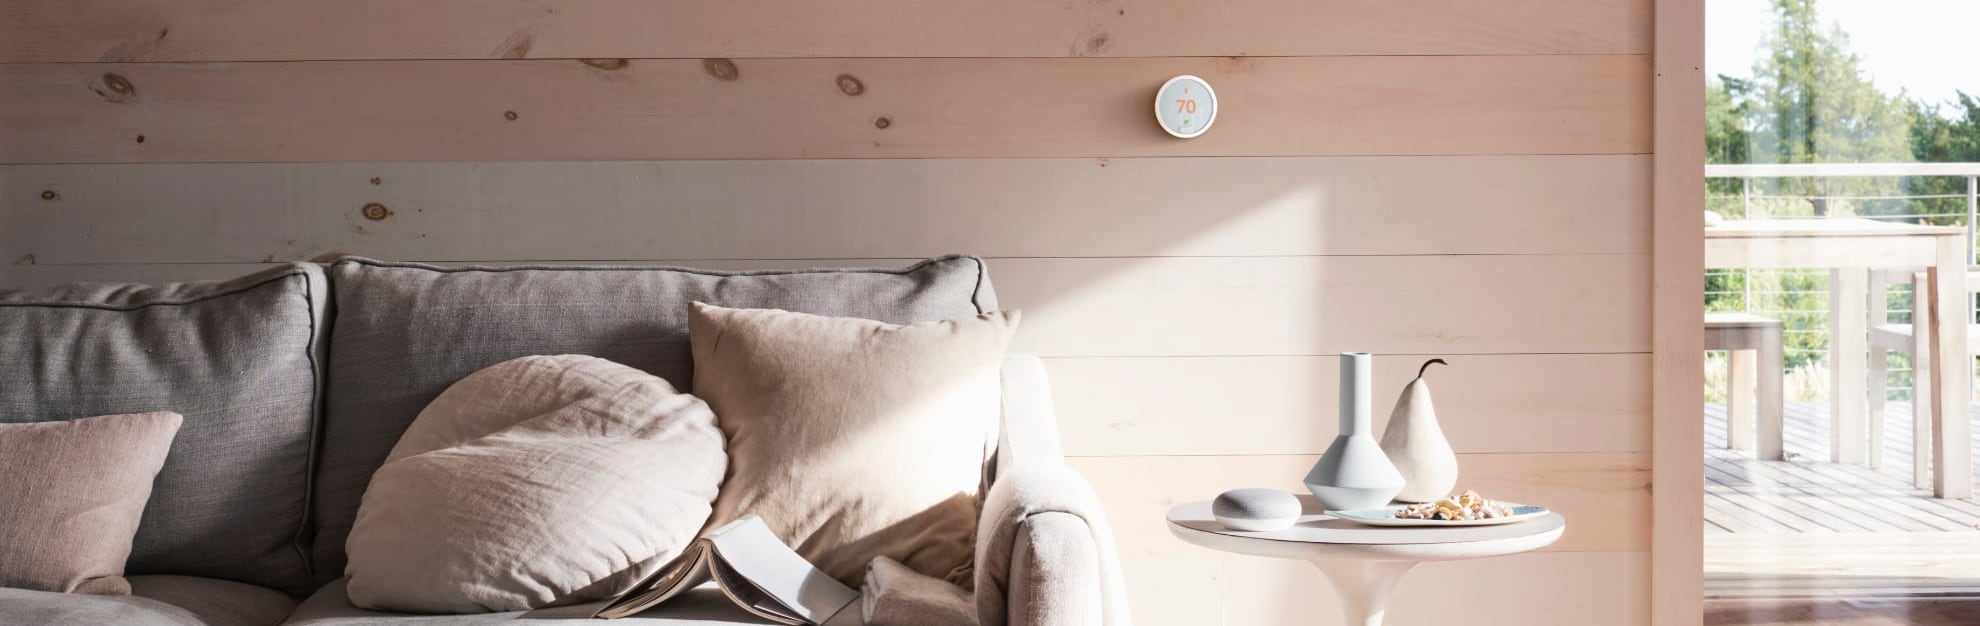 Vivint Home Automation in Omaha